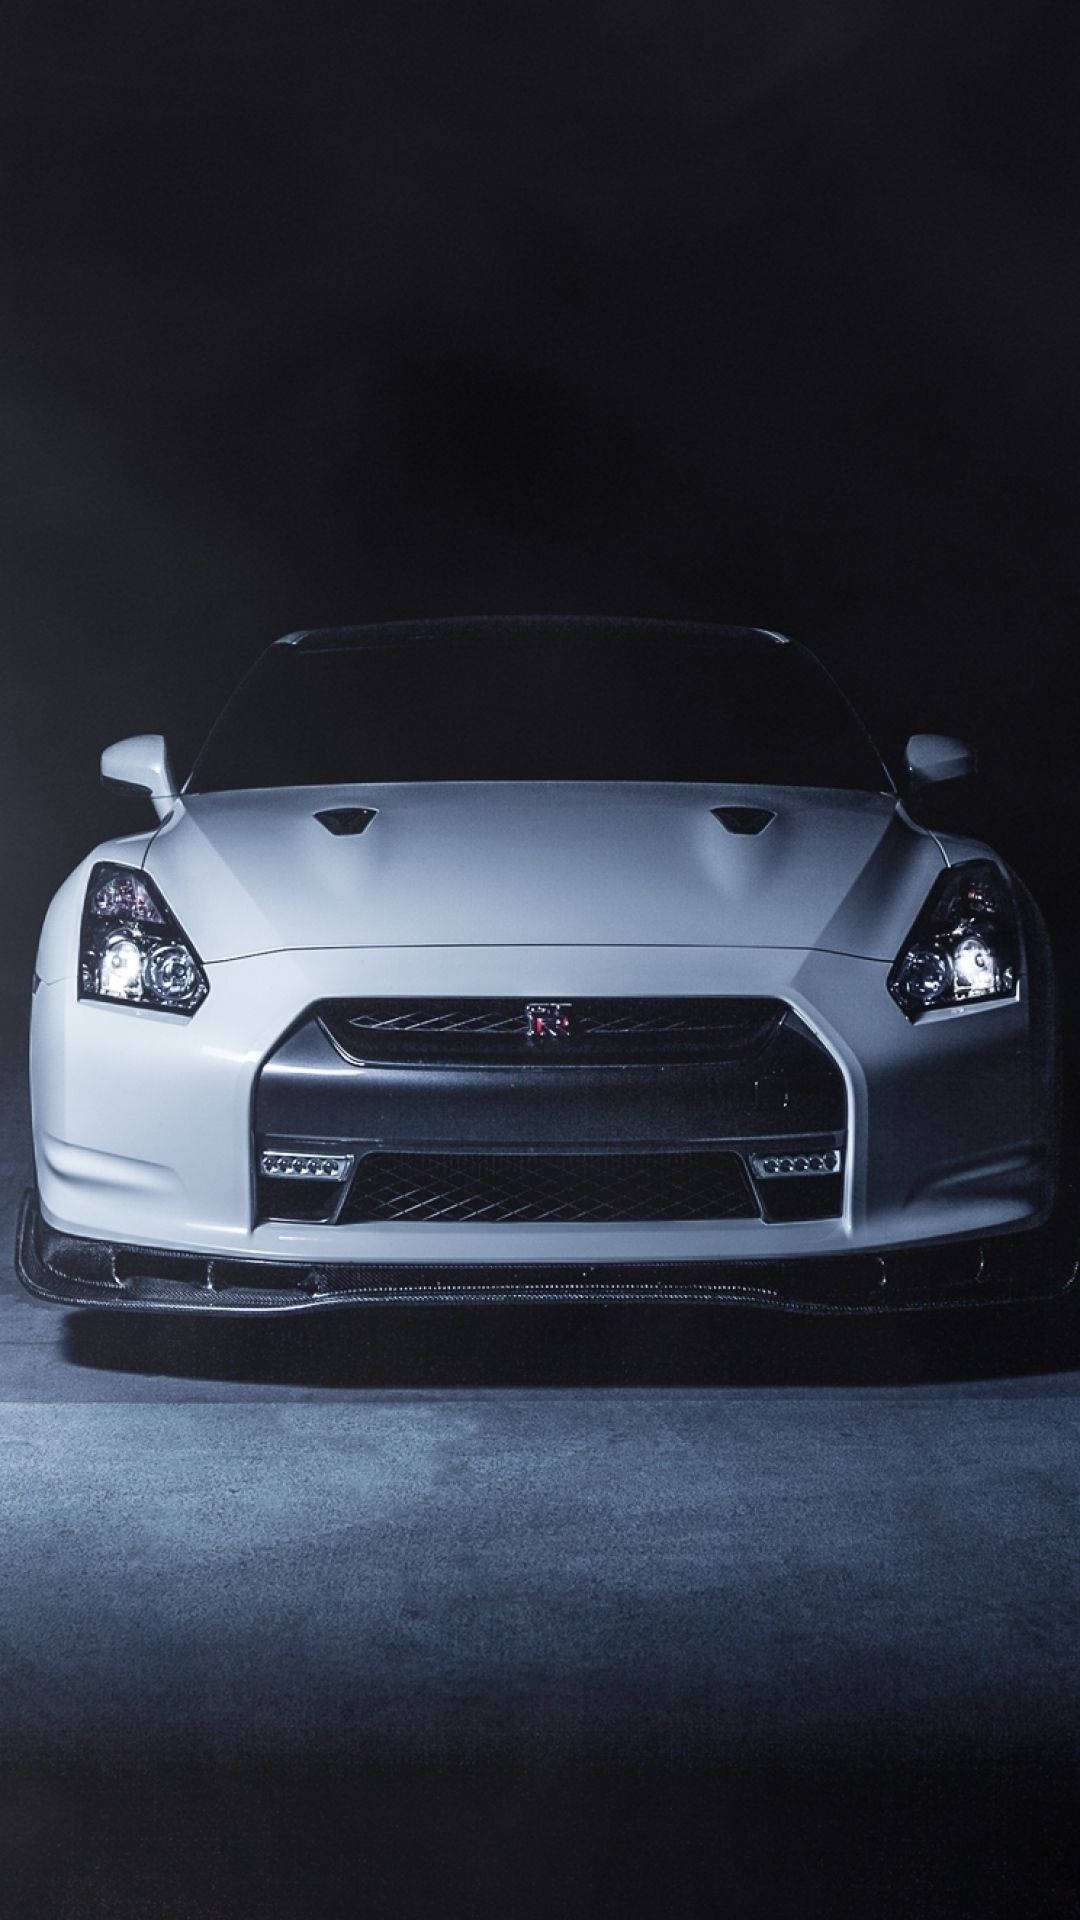 Front View Of White Nissan GTR Car Wallpaper